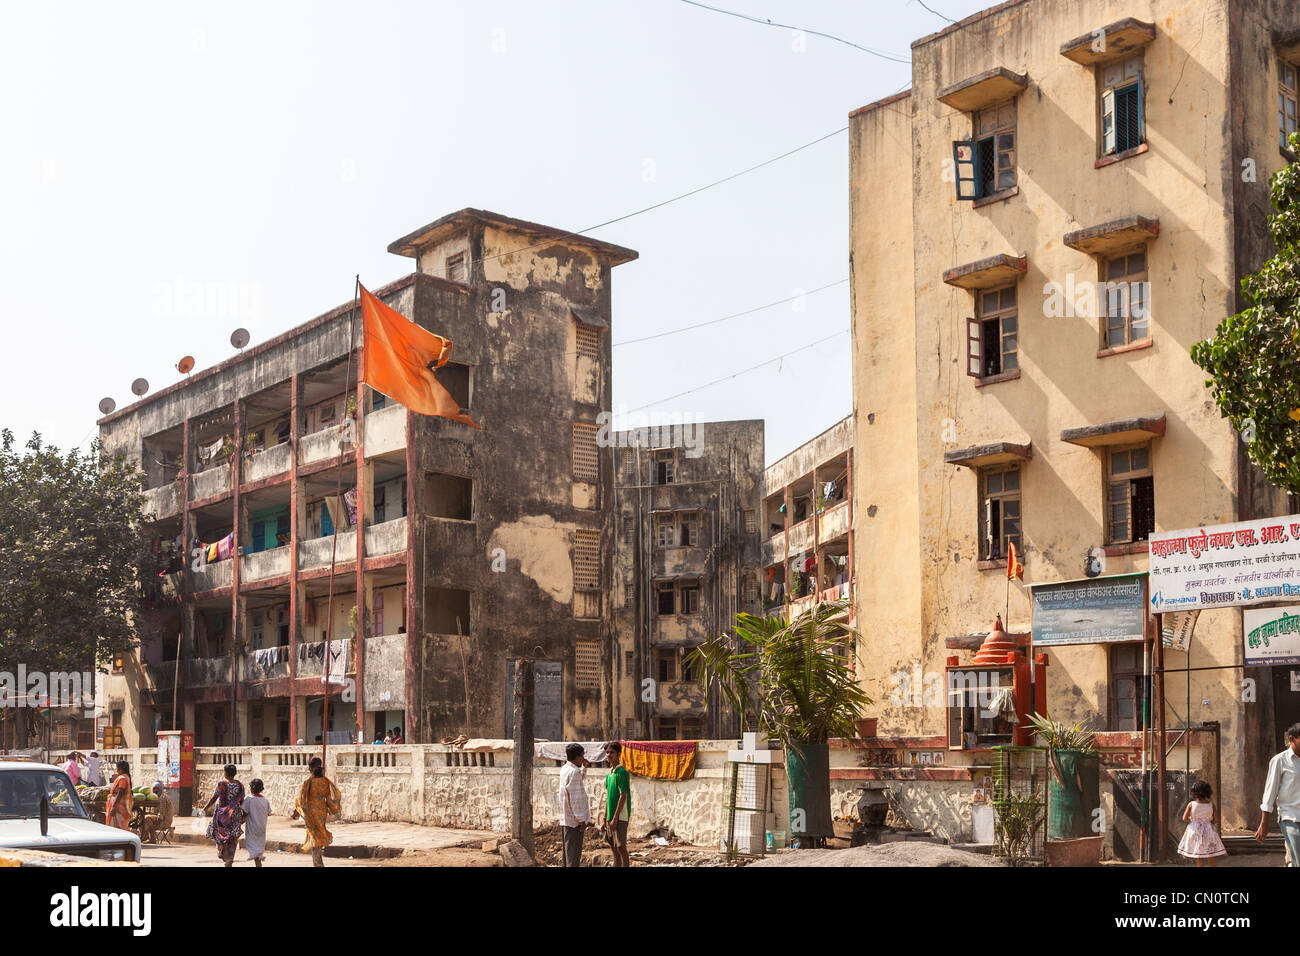 Street view of blocks of dirty and dilapidated flats and apartments in a slum area of Mumbai, India Stock Photo